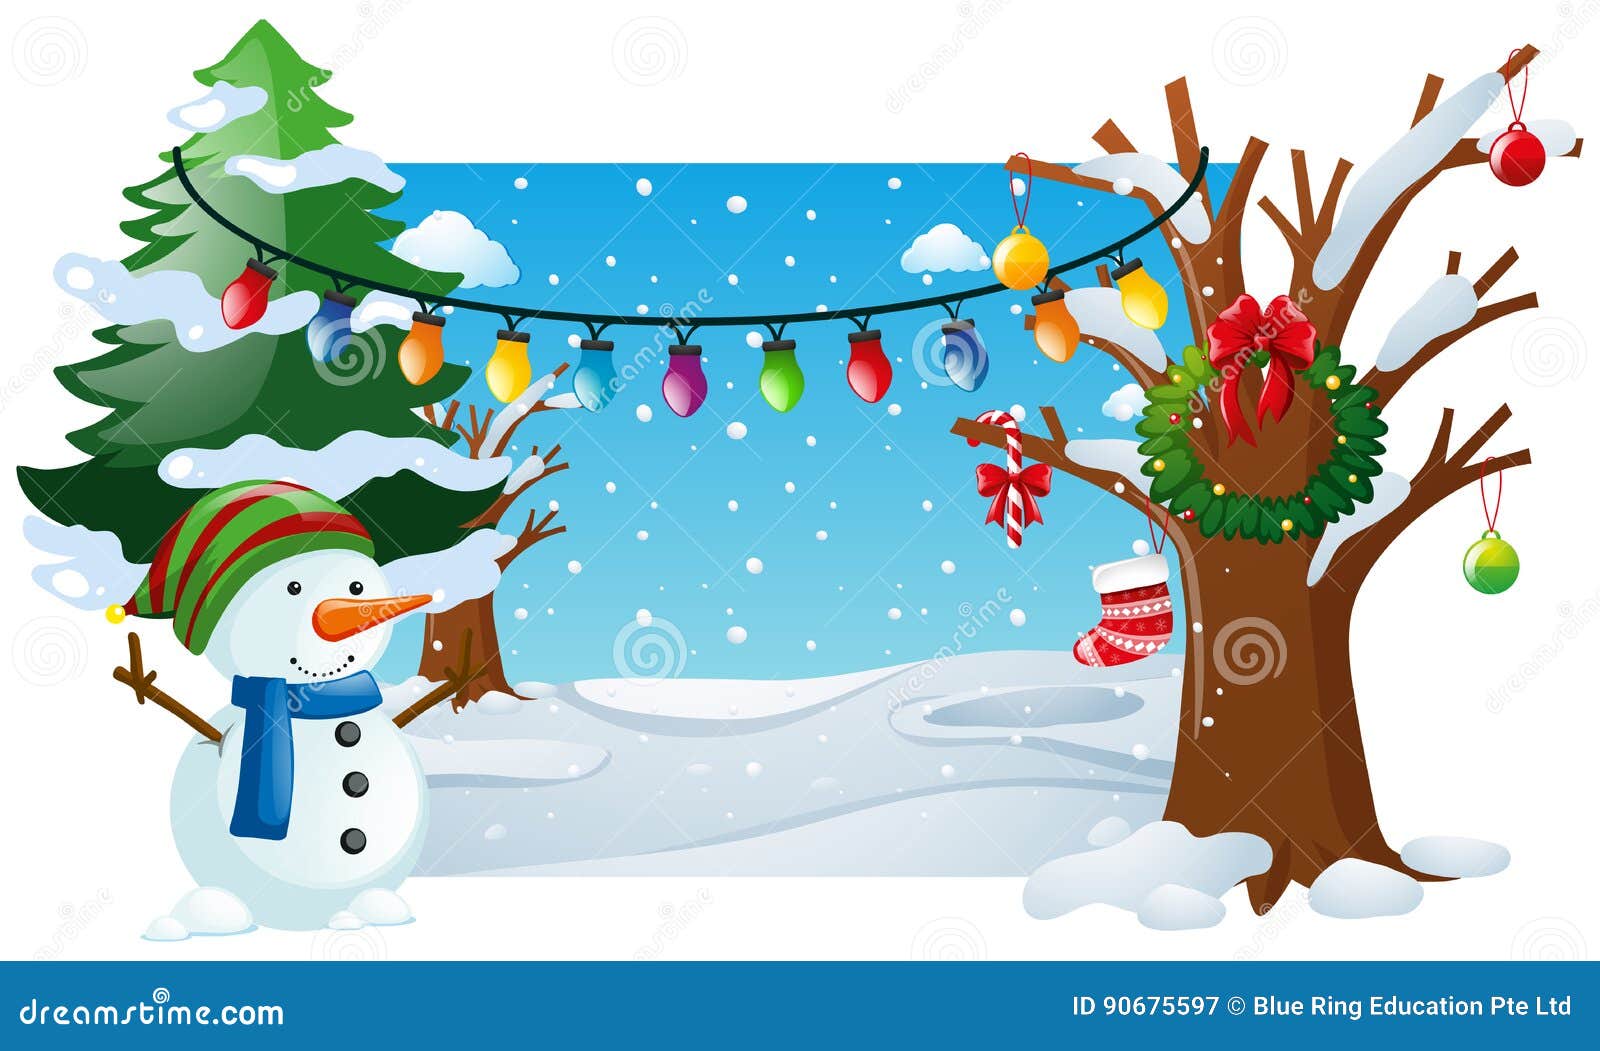 Download Winter Scene With Snowman And Lights Stock Vector ...